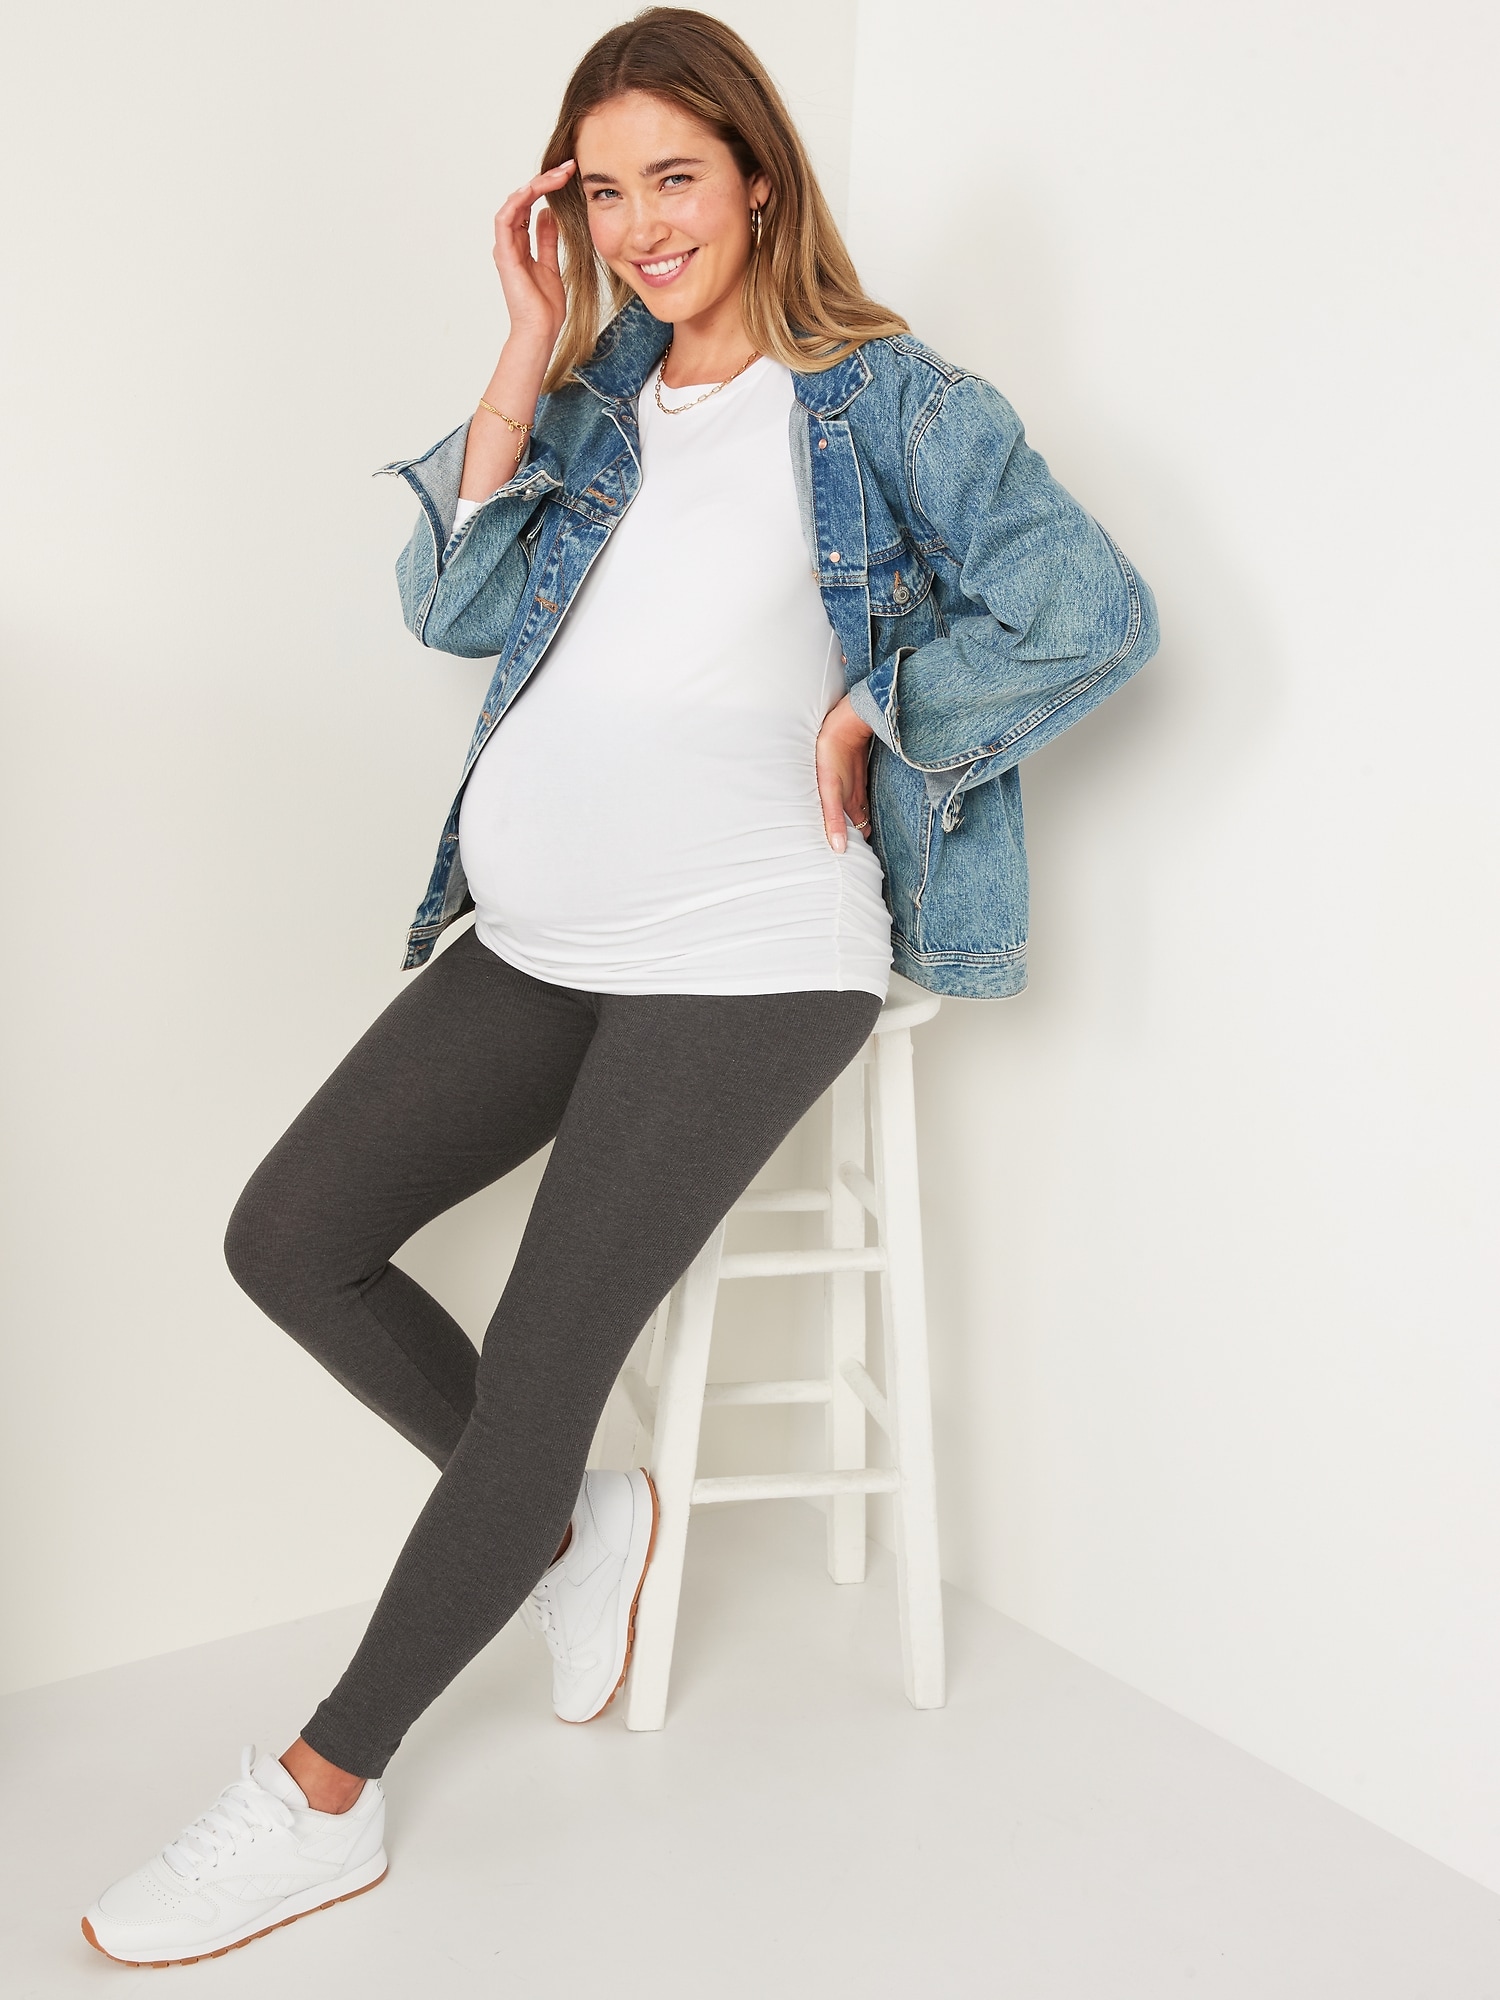 Top 5 Maternity Jeans, Leggings, Tights